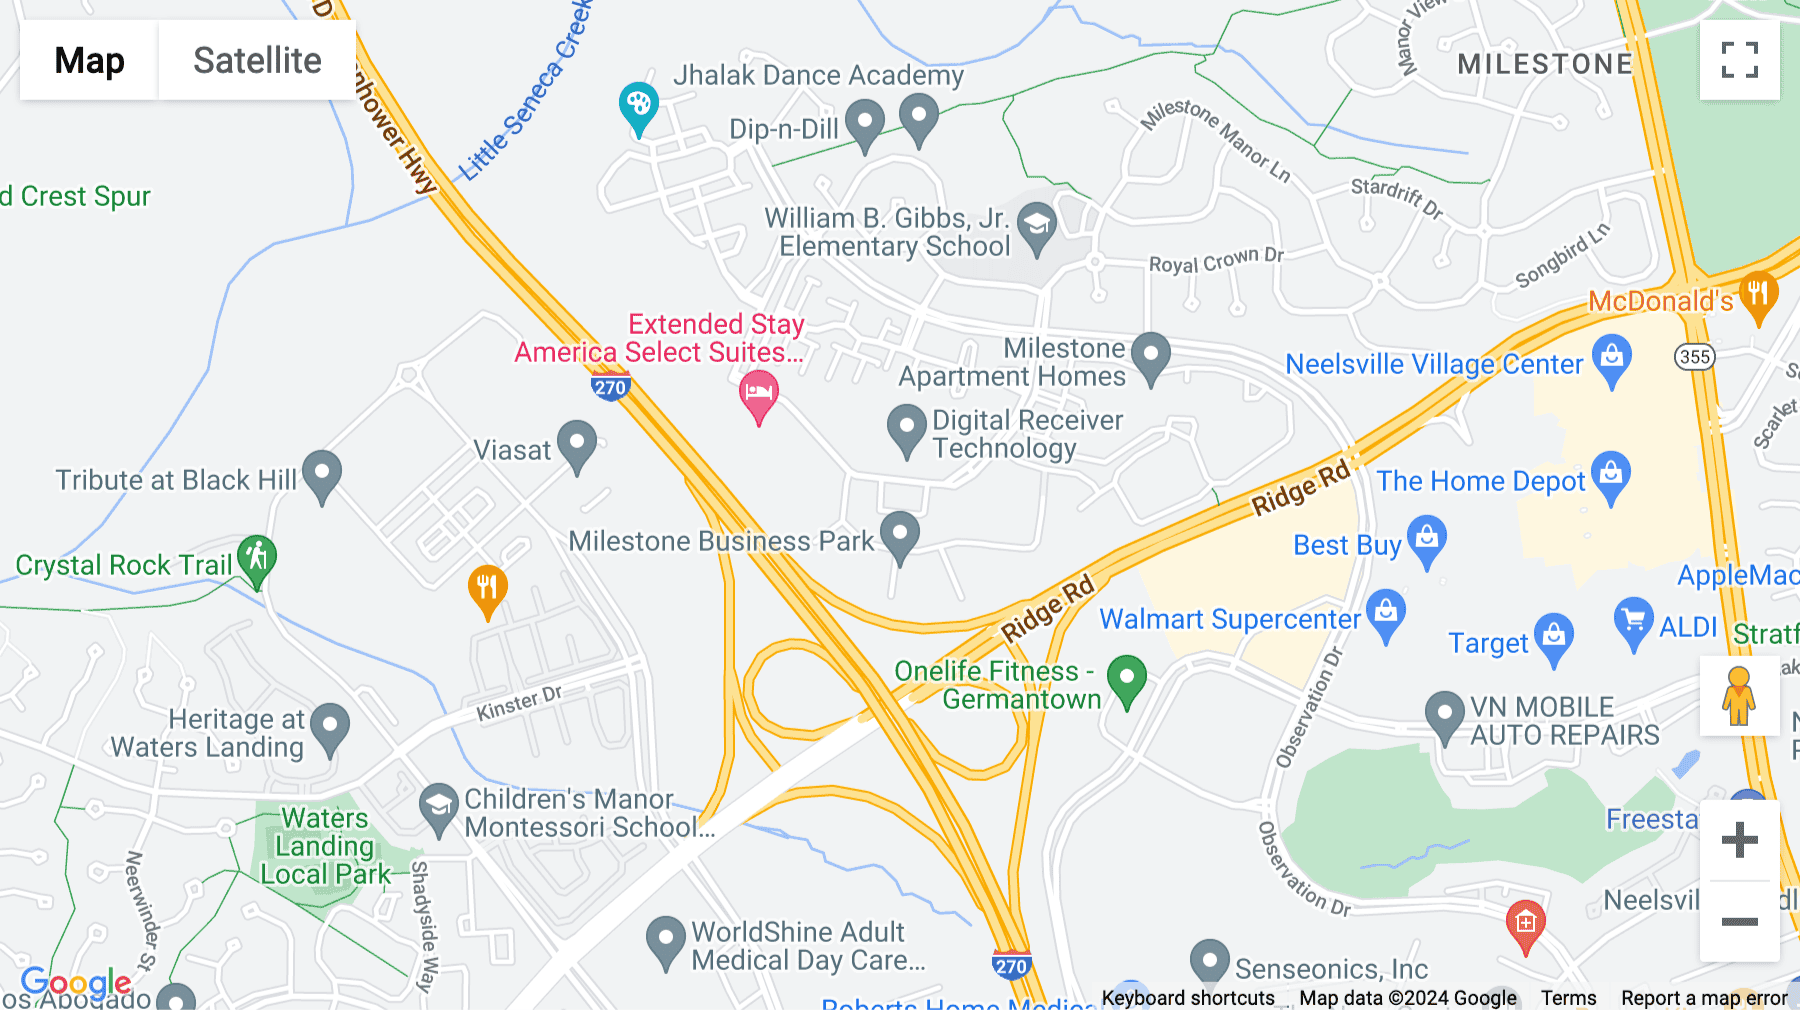 Click for interative map of 12410 Milestone Center Drive, Suite 600, Germantown, Maryland, Germantown